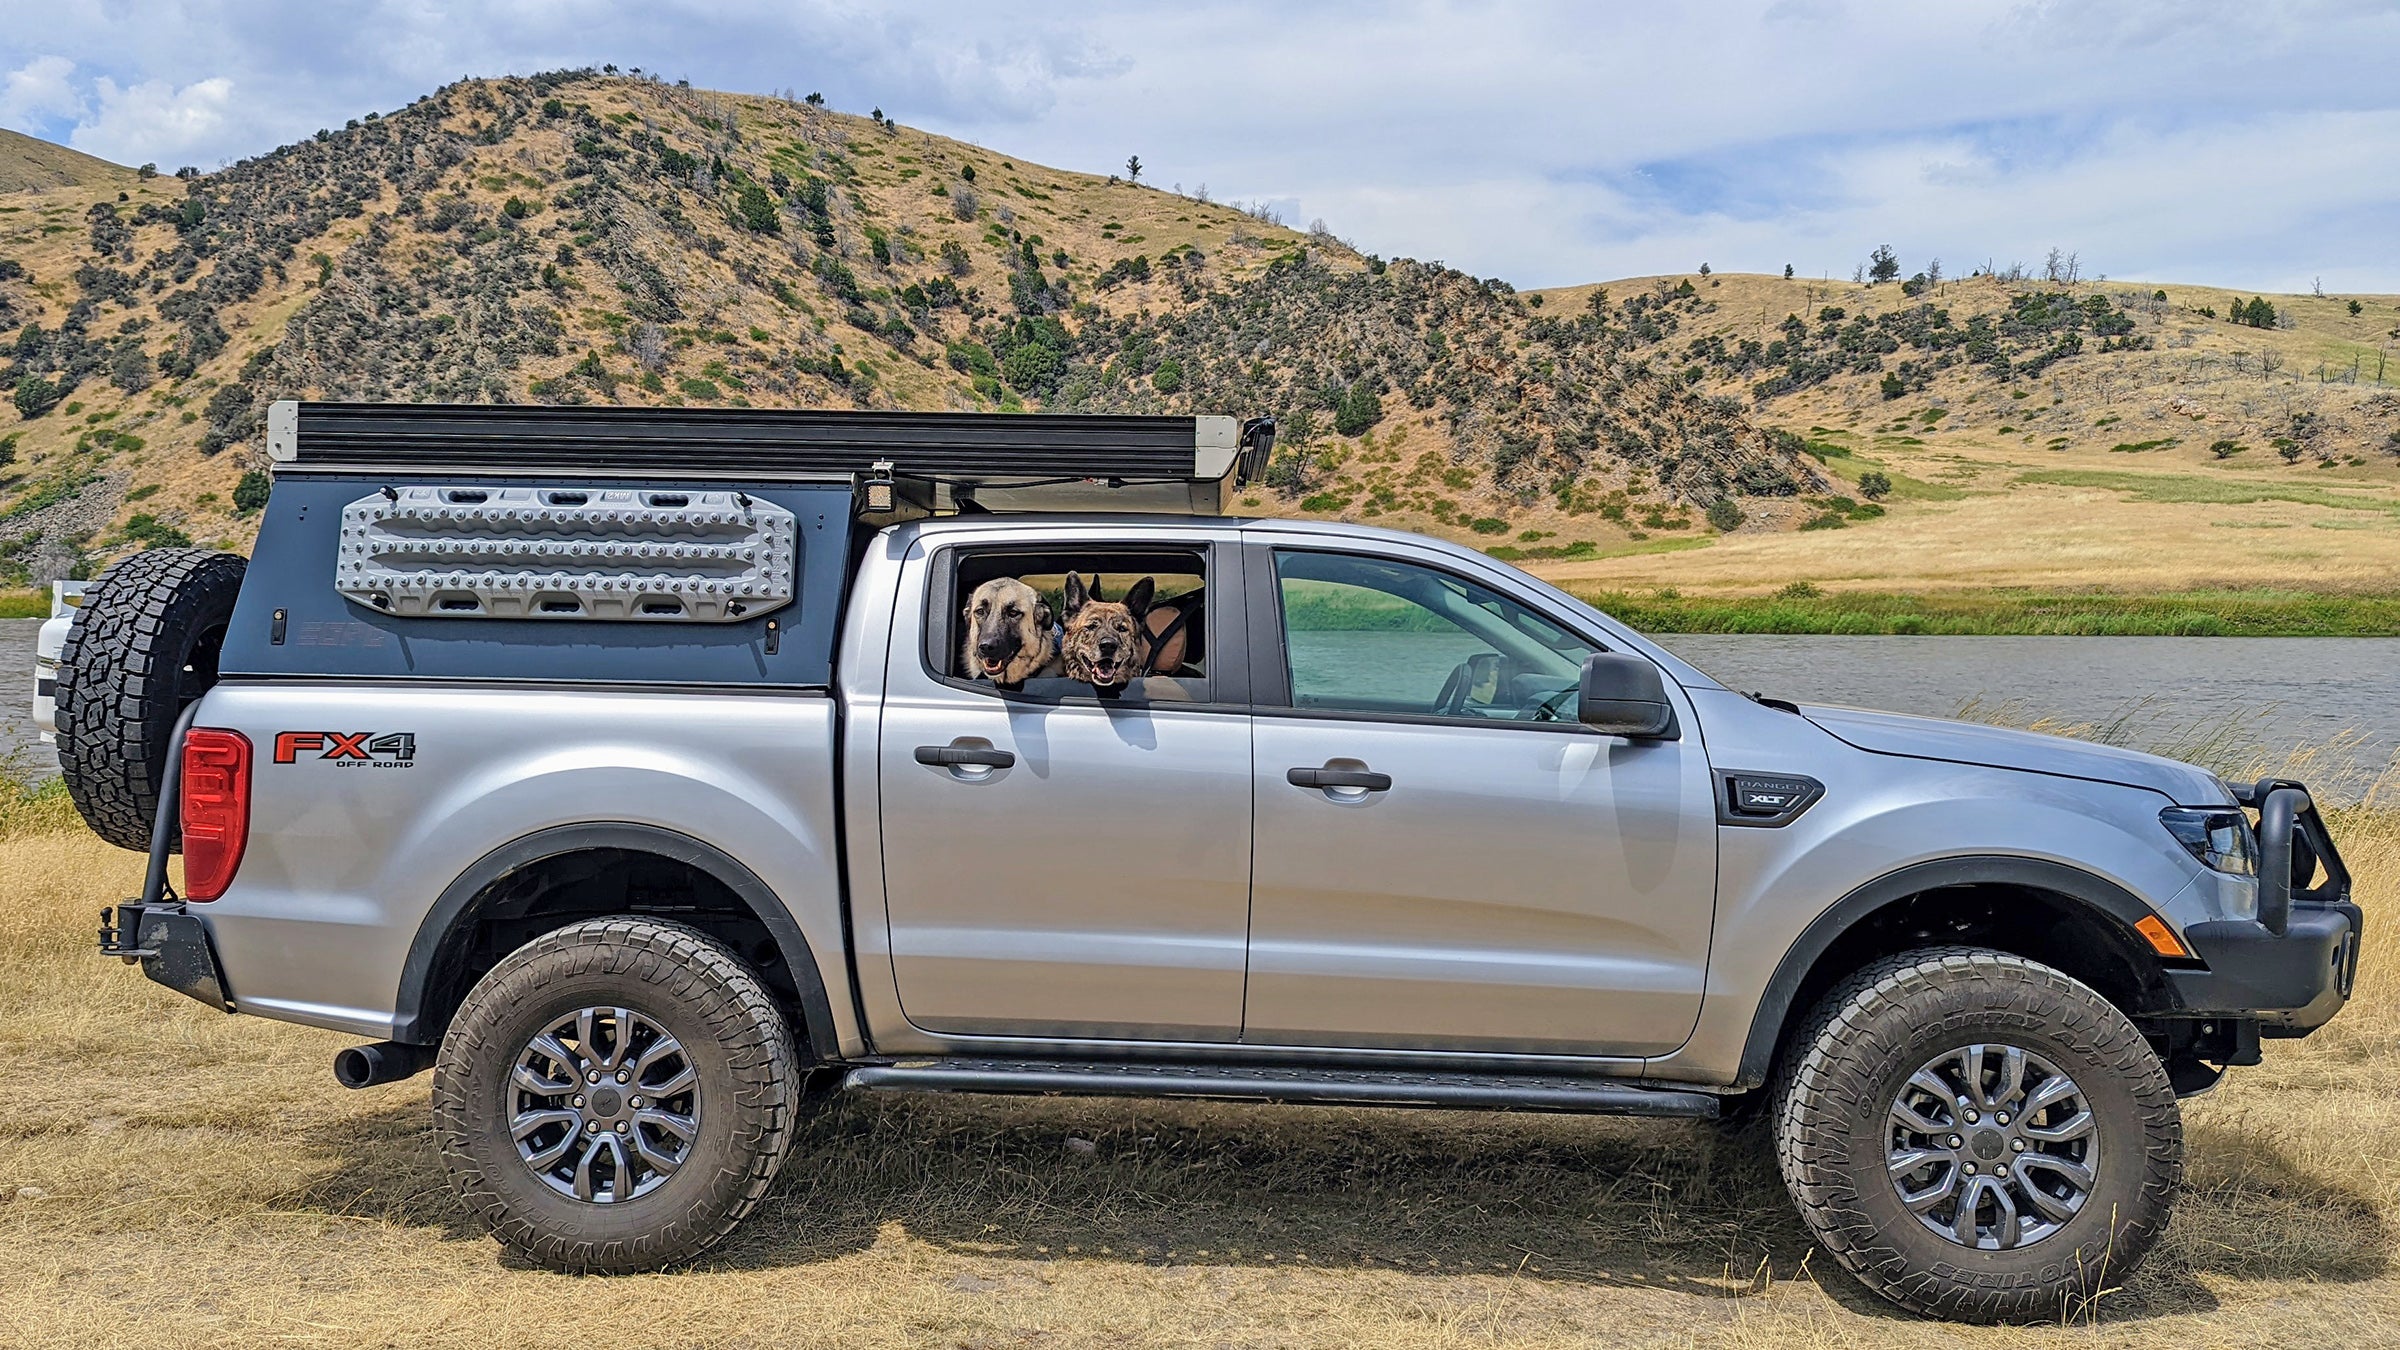 Truck Bed Seats by Innovative Truck Bed Seats